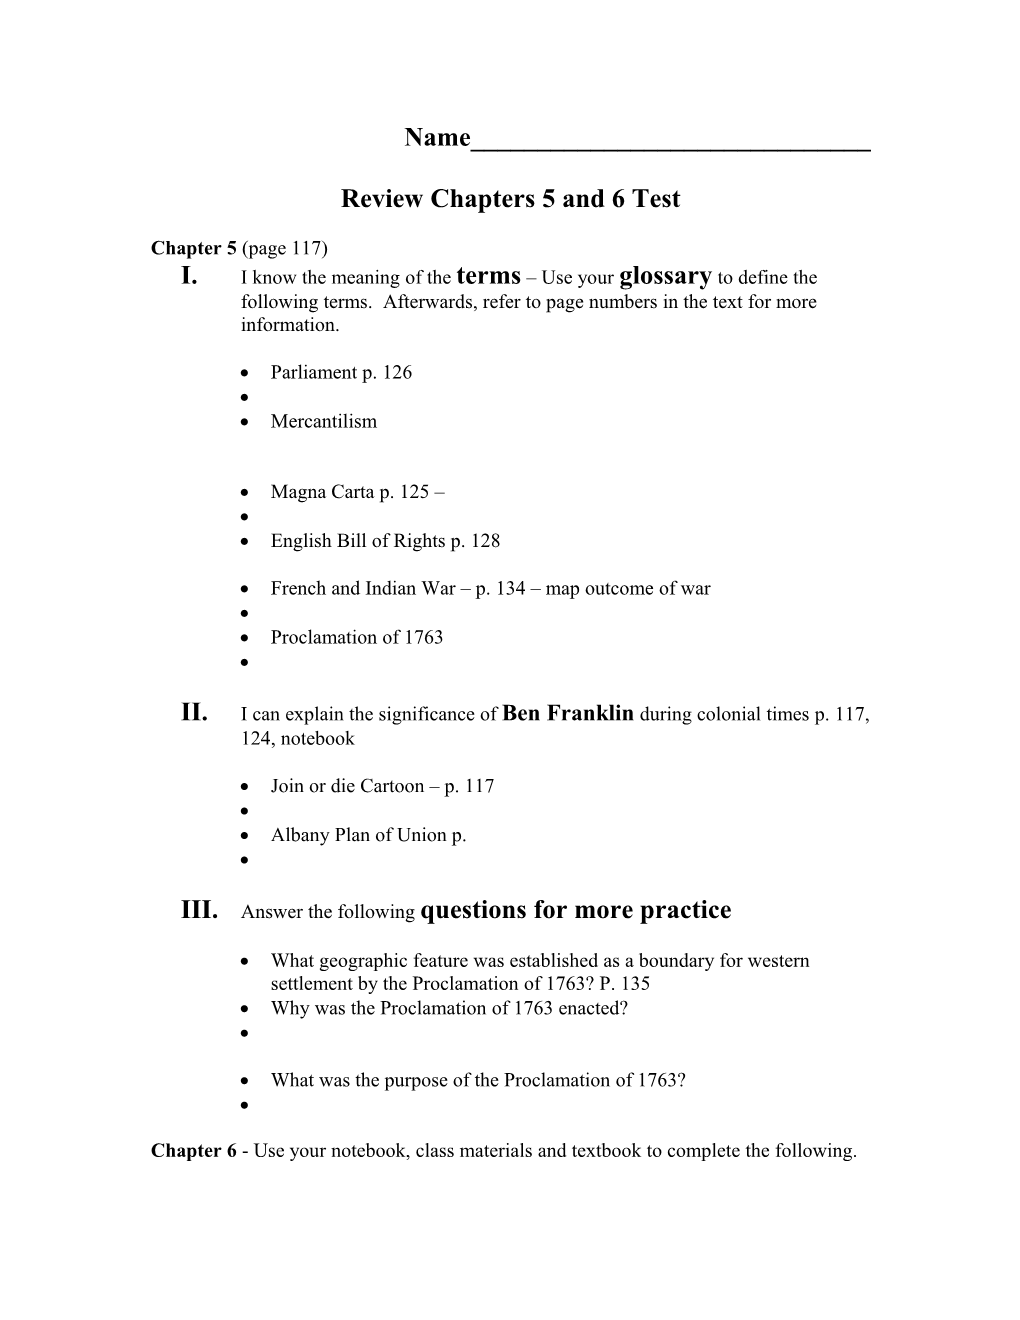 Review Chapters 5 and 6 Test